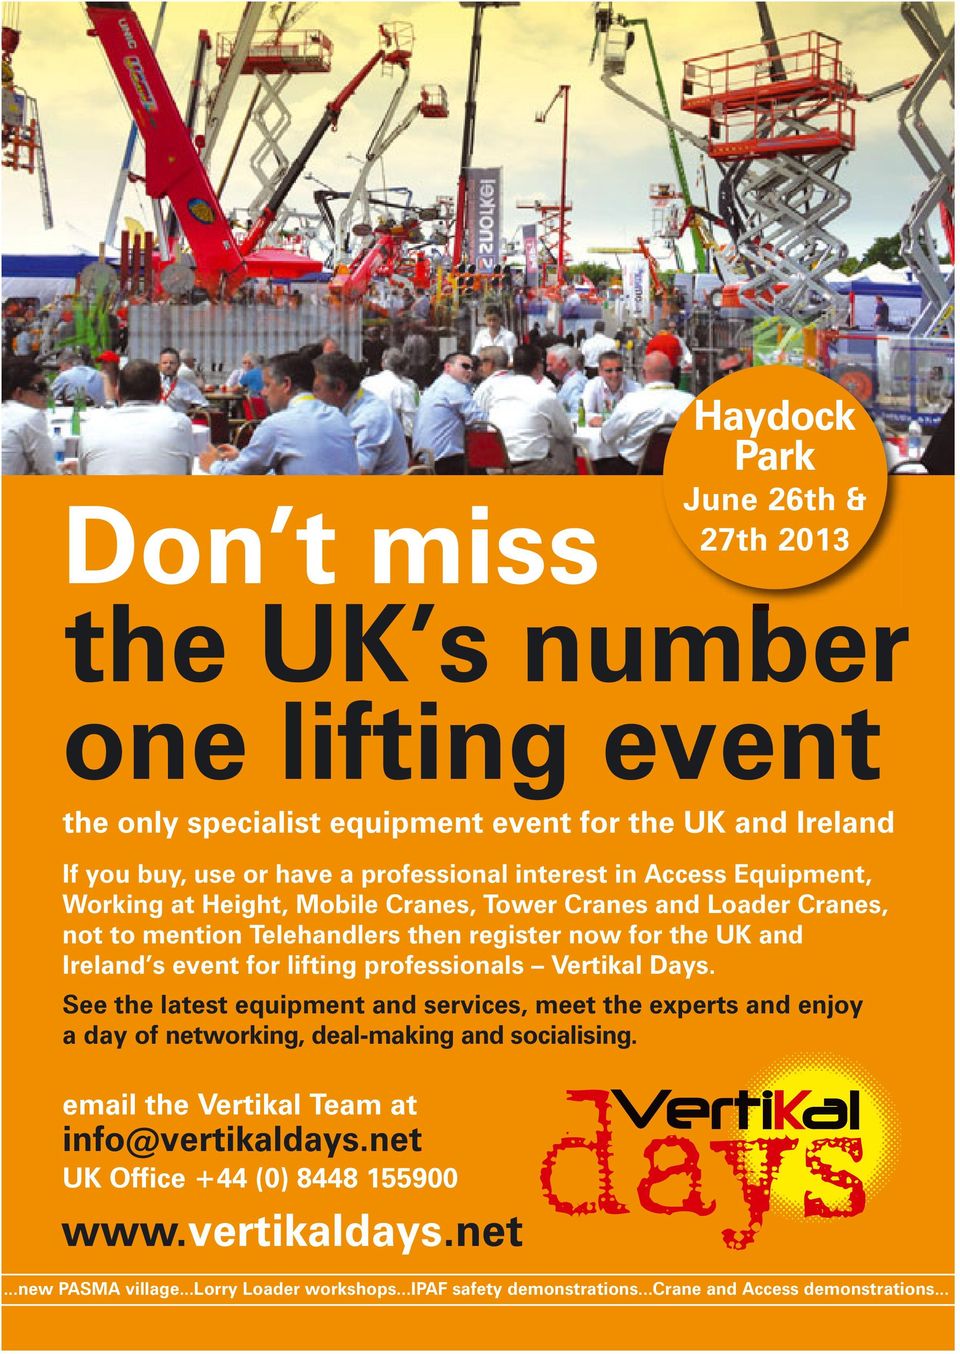 lifting professionals Vertikal Days. See the latest equipment and services, meet the experts and enjoy a day of networking, deal-making and socialising.